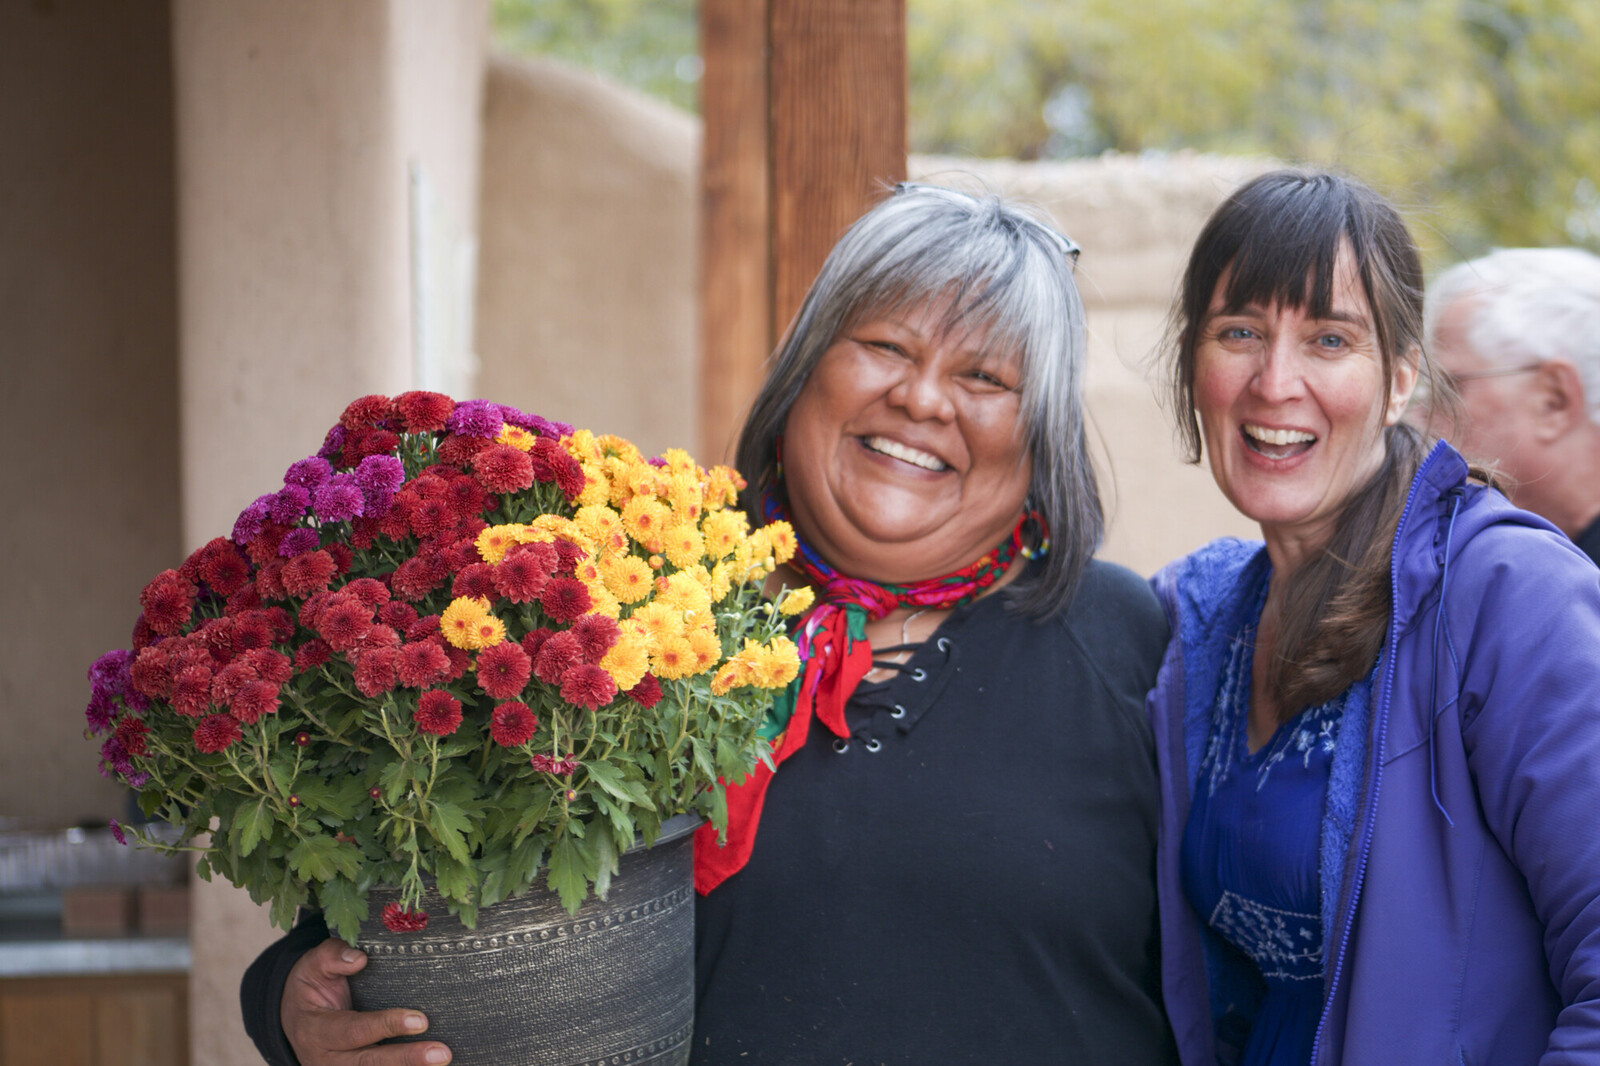 Two women smiling together with one holding a flower pot